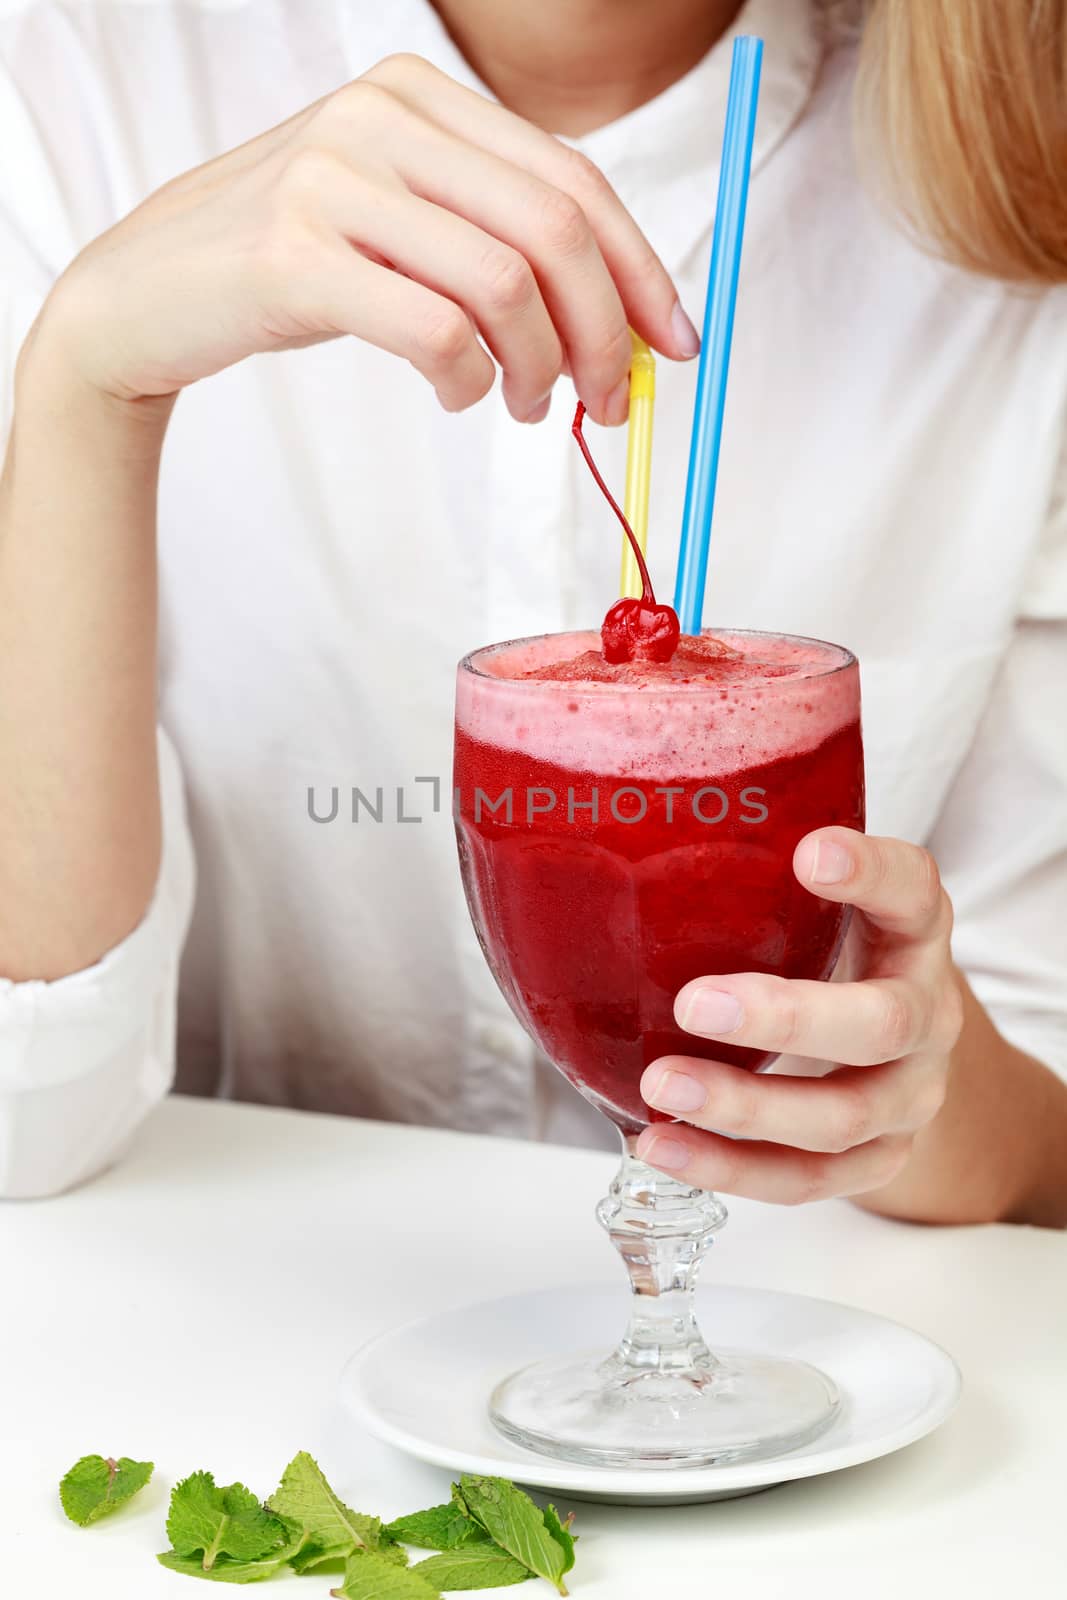 Cherry smoothie in a big glass cup with two straws in woman's ha by Nobilior